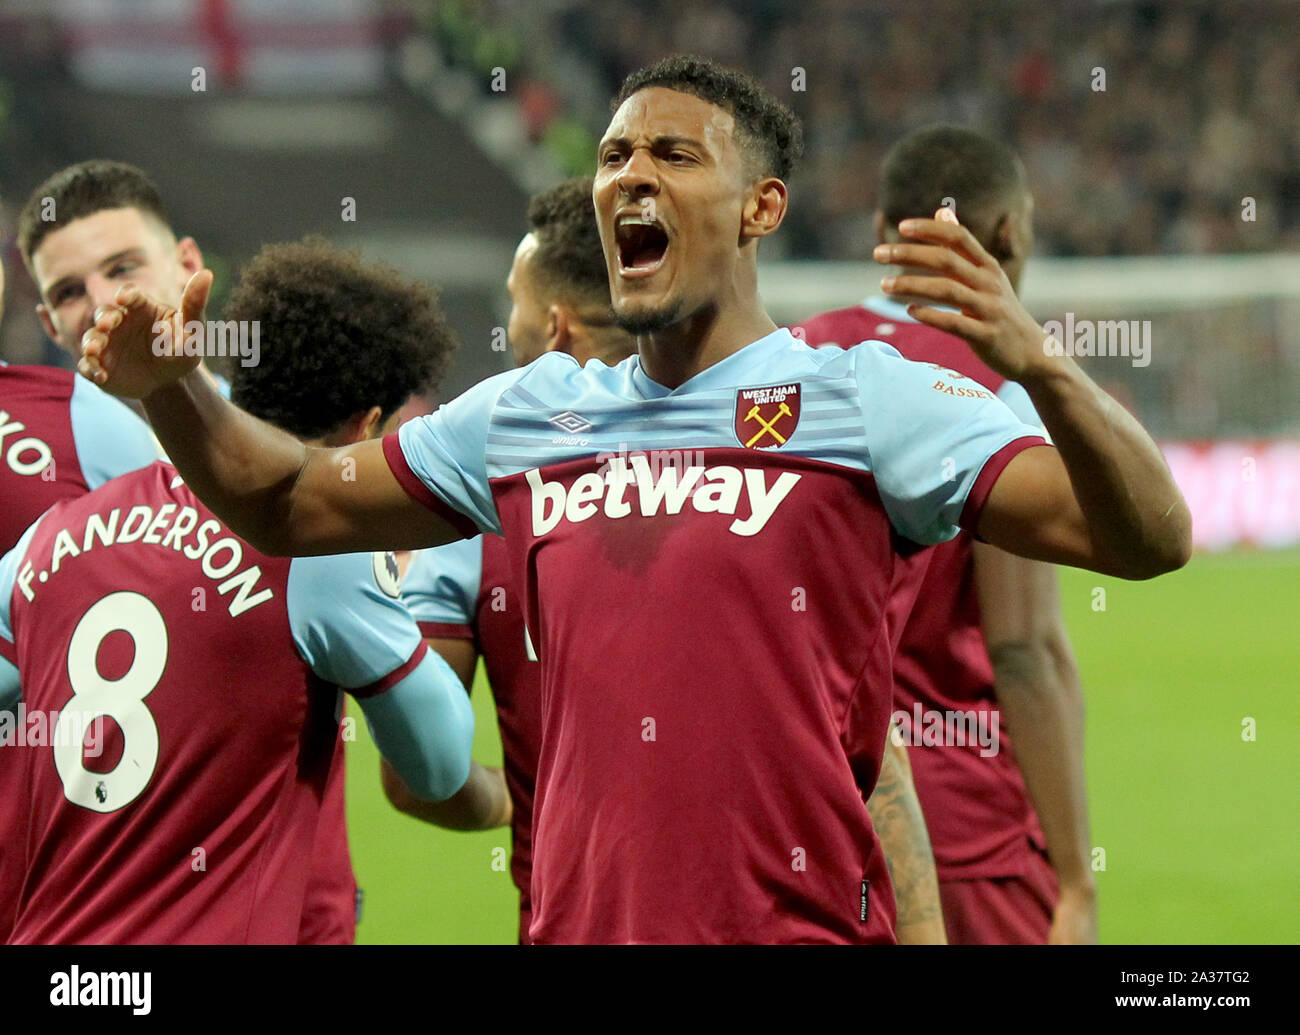 London, UK. 6th October 2019. Sebastian Haller celebrates after scoring for West Ham United during the Premier League match between West Ham United and Crystal Palace played at London Stadium, London, UK. Picture by: Jason Mitchell/Alamy Live News  English Premier and Football League images are only to be used in an editorial context, images are not allowed to be published on another internet site unless a licence has been obtained from DataCo Ltd +44 207 864 9121. Credit: Headlinephoto Limited/Alamy Live News Stock Photo